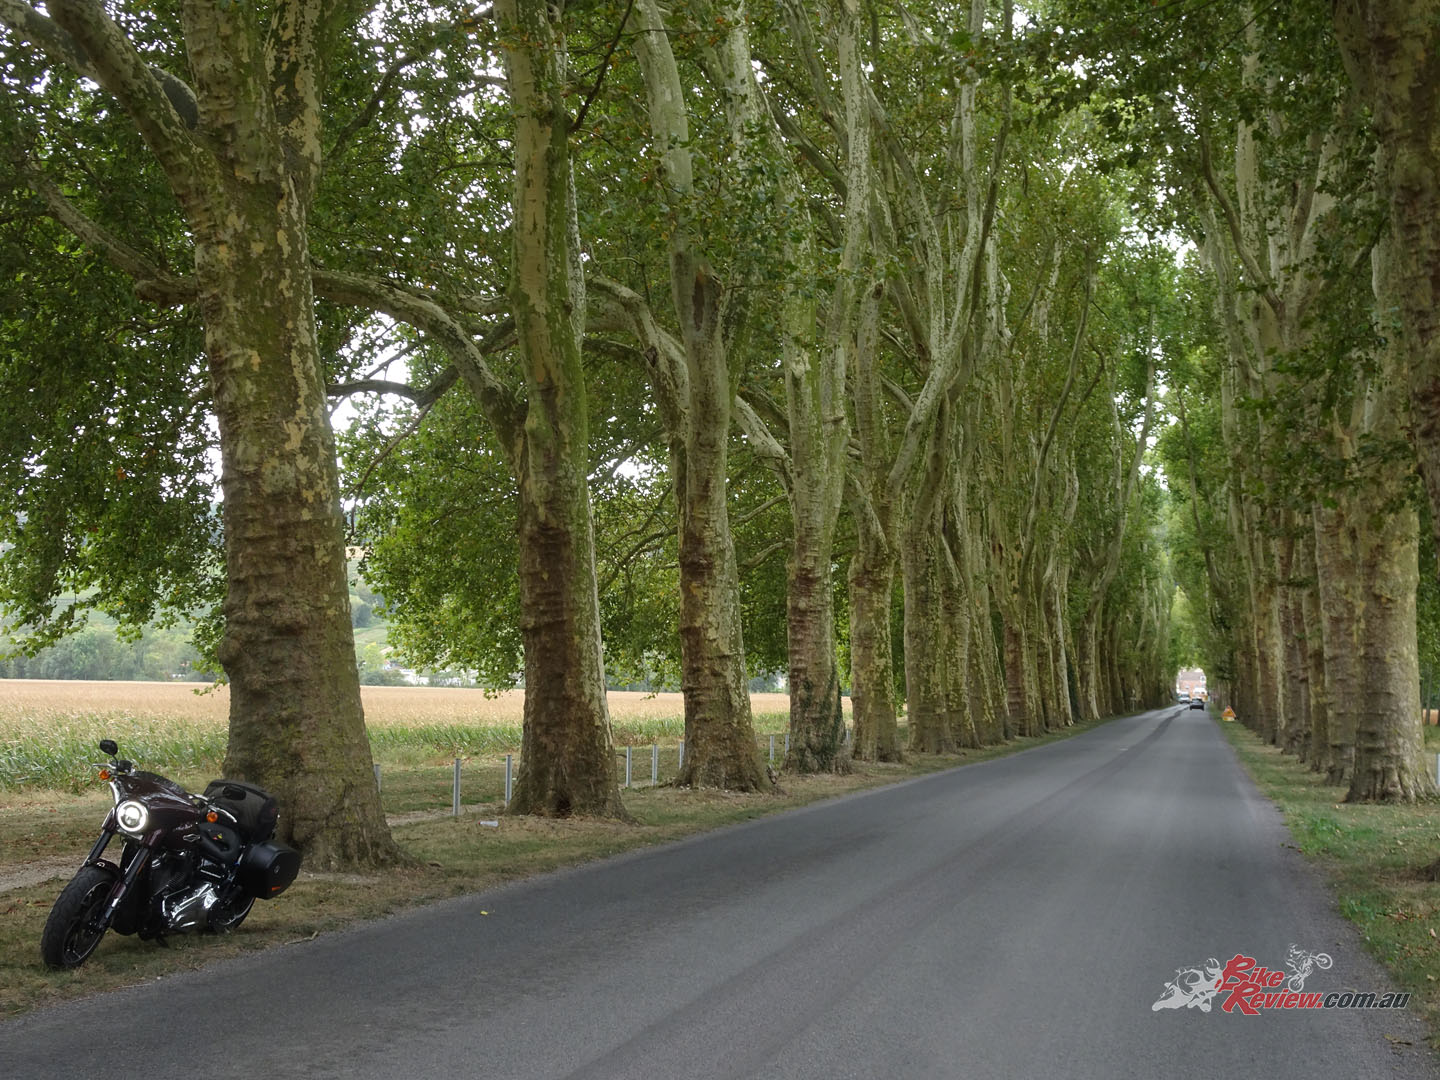 The tree-lines roads of northern France make for cool riding even in the heat of summer.